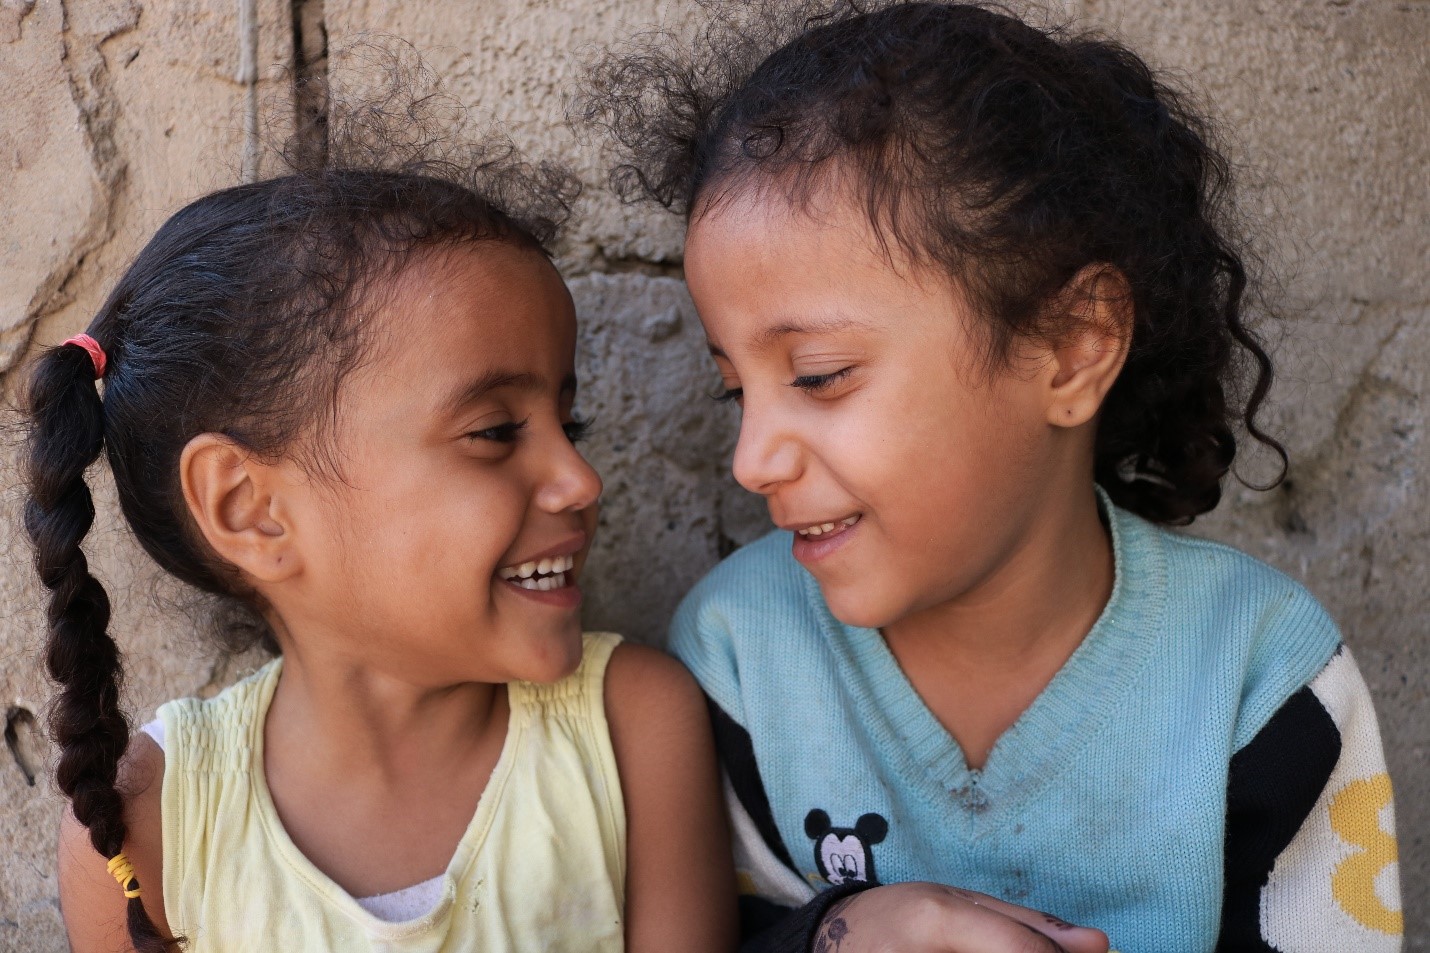 Two young girls smiling